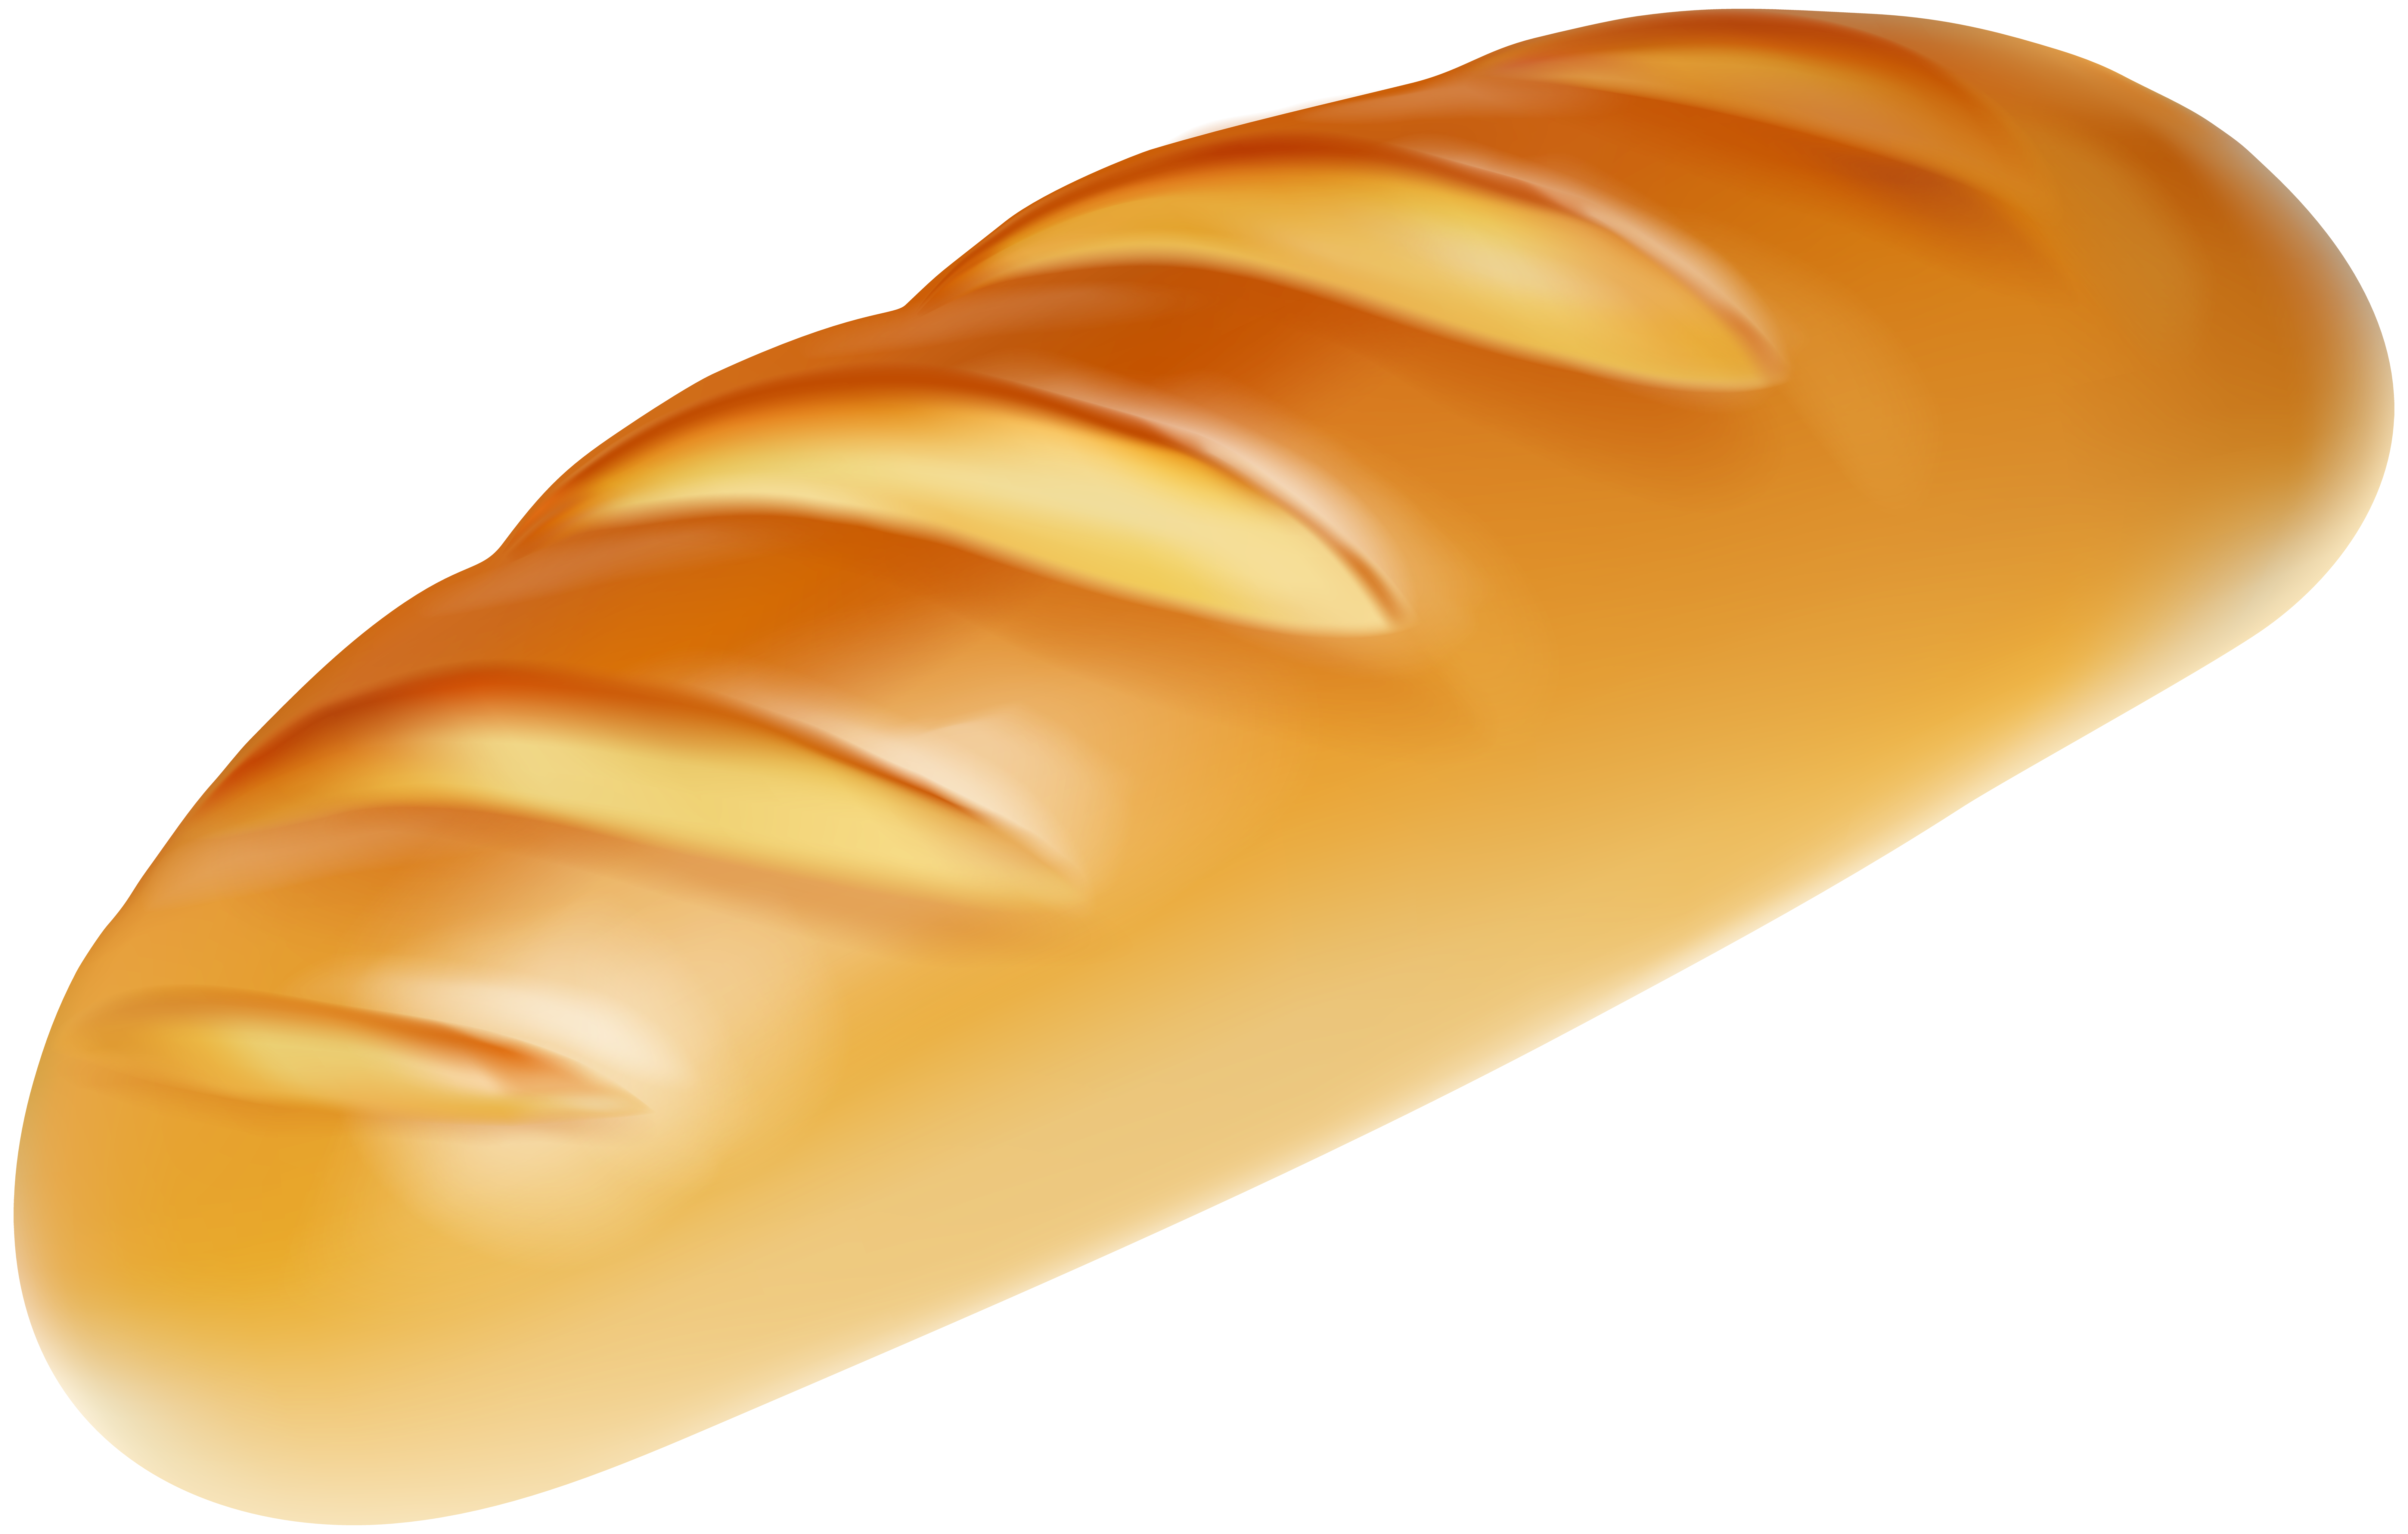 Bakery Clipart Png